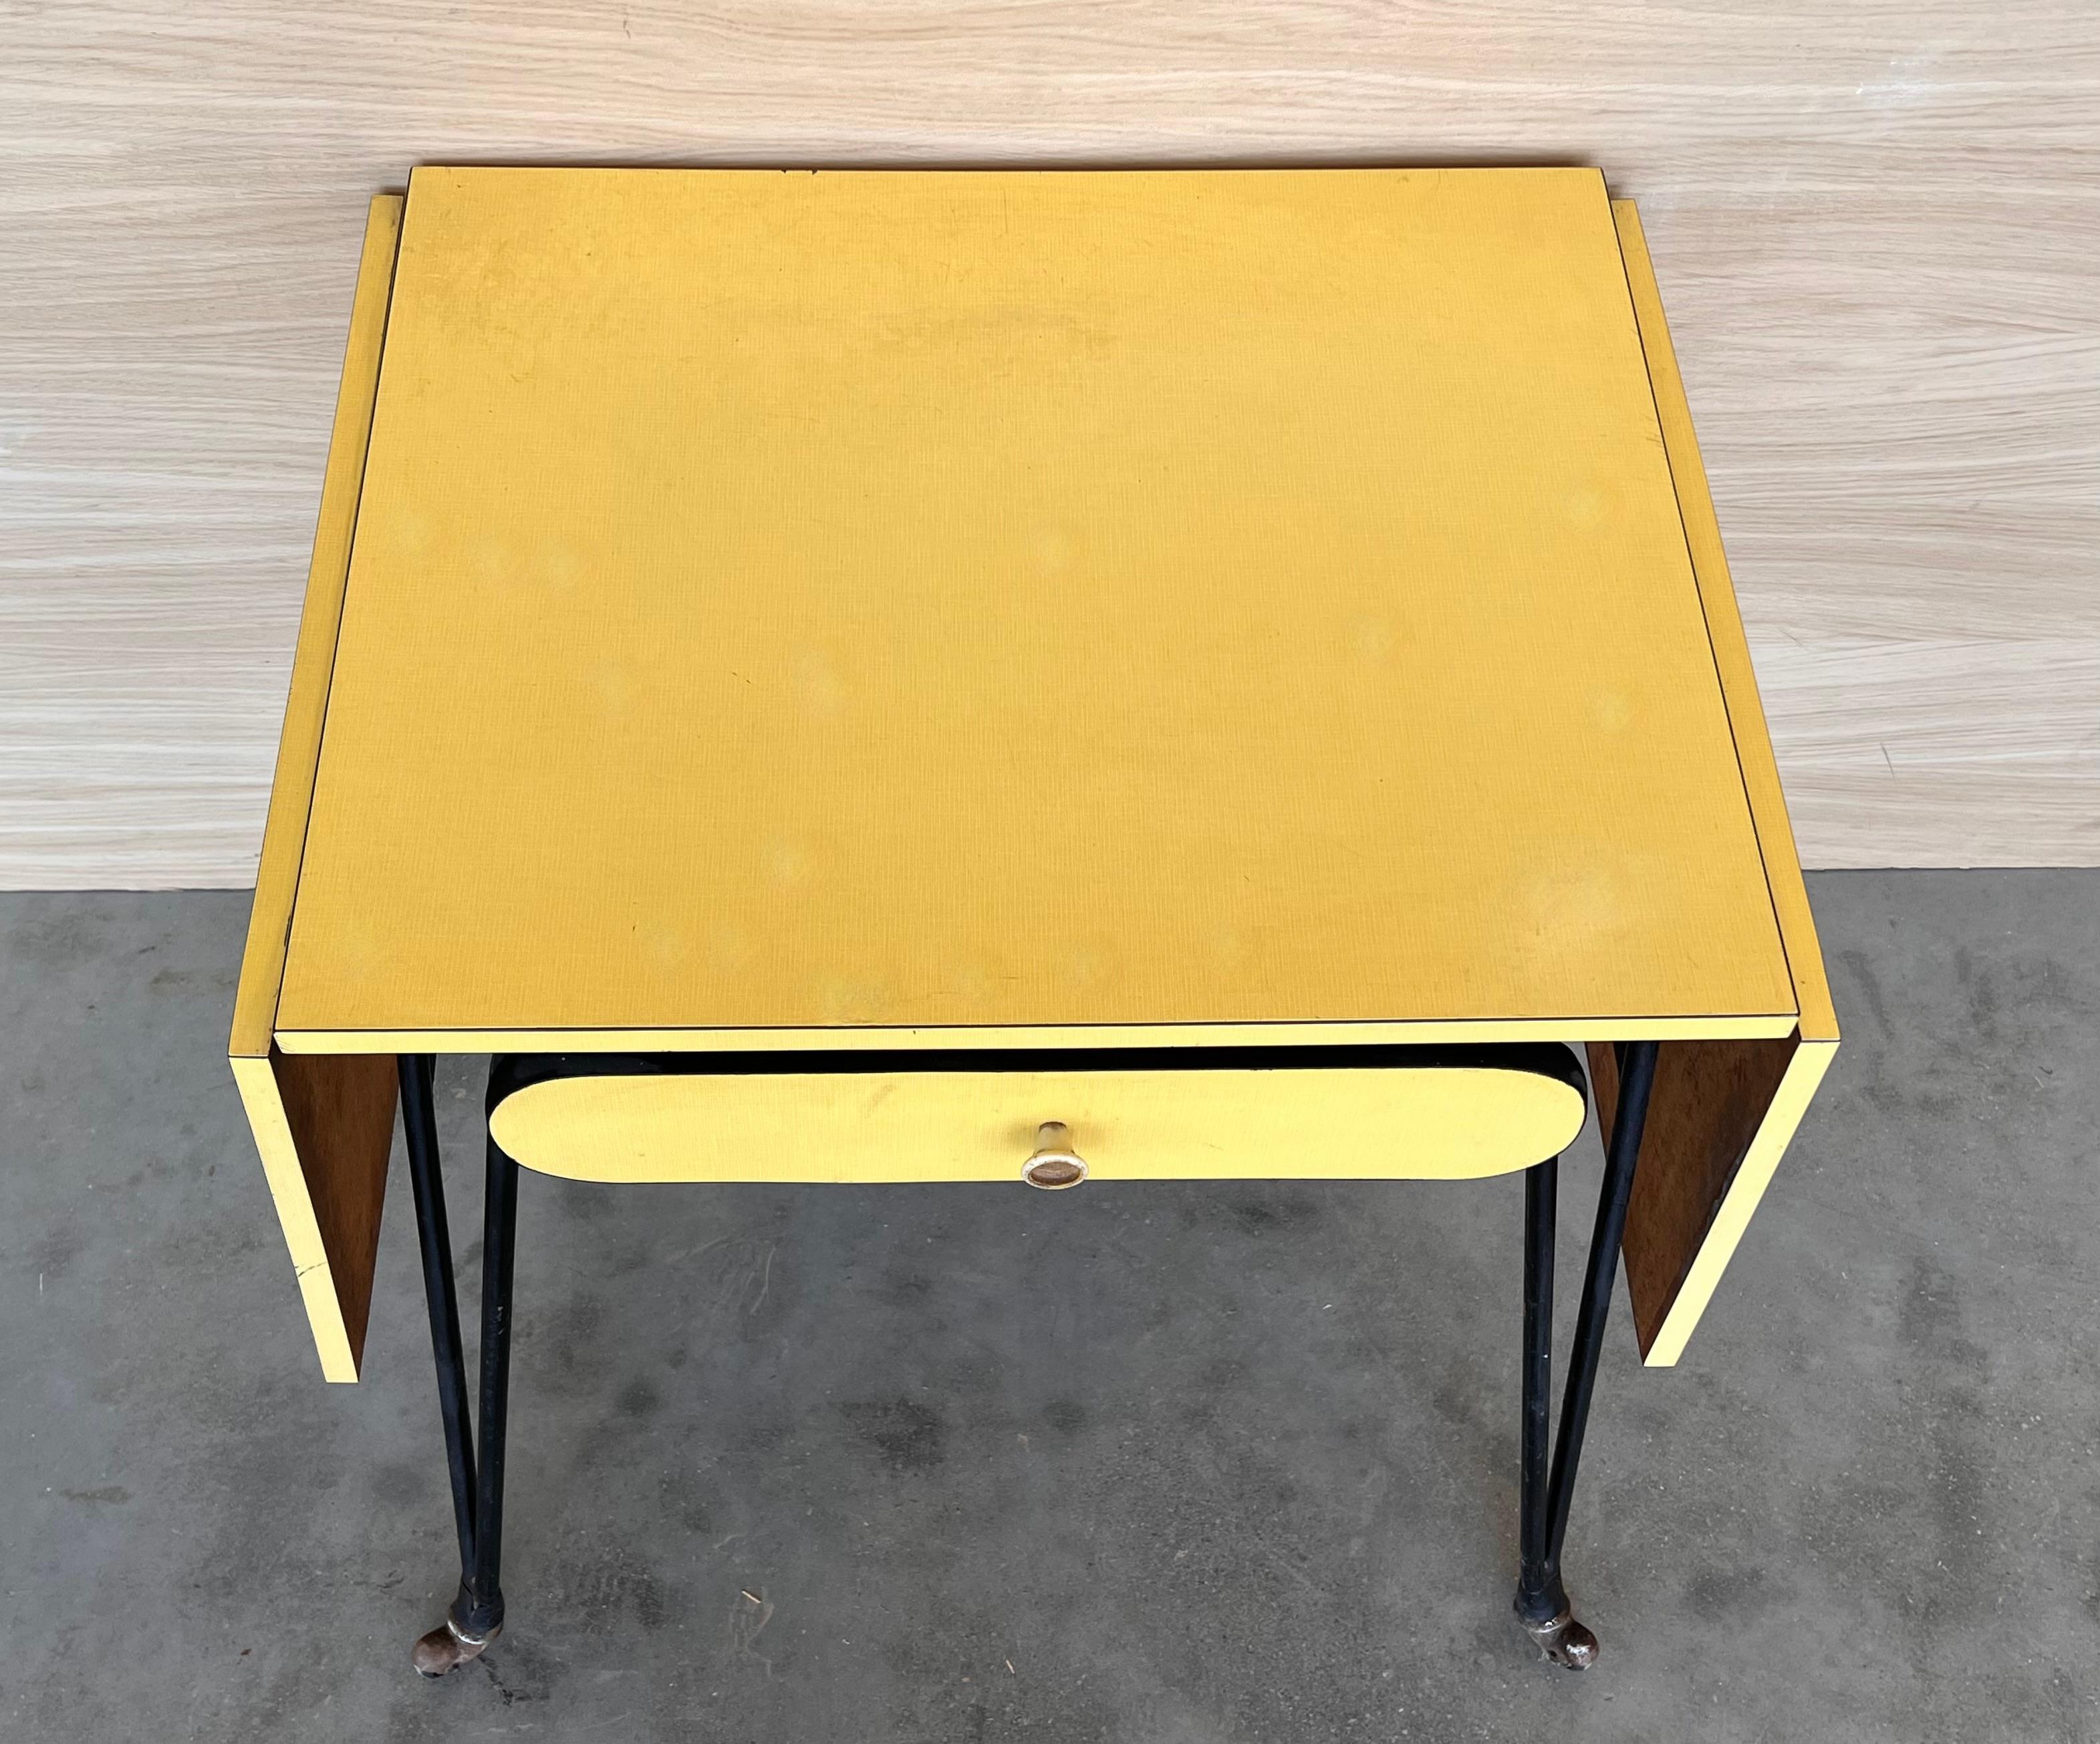 20th Century Yellow Formica children's school desk with two leaves For Sale 1